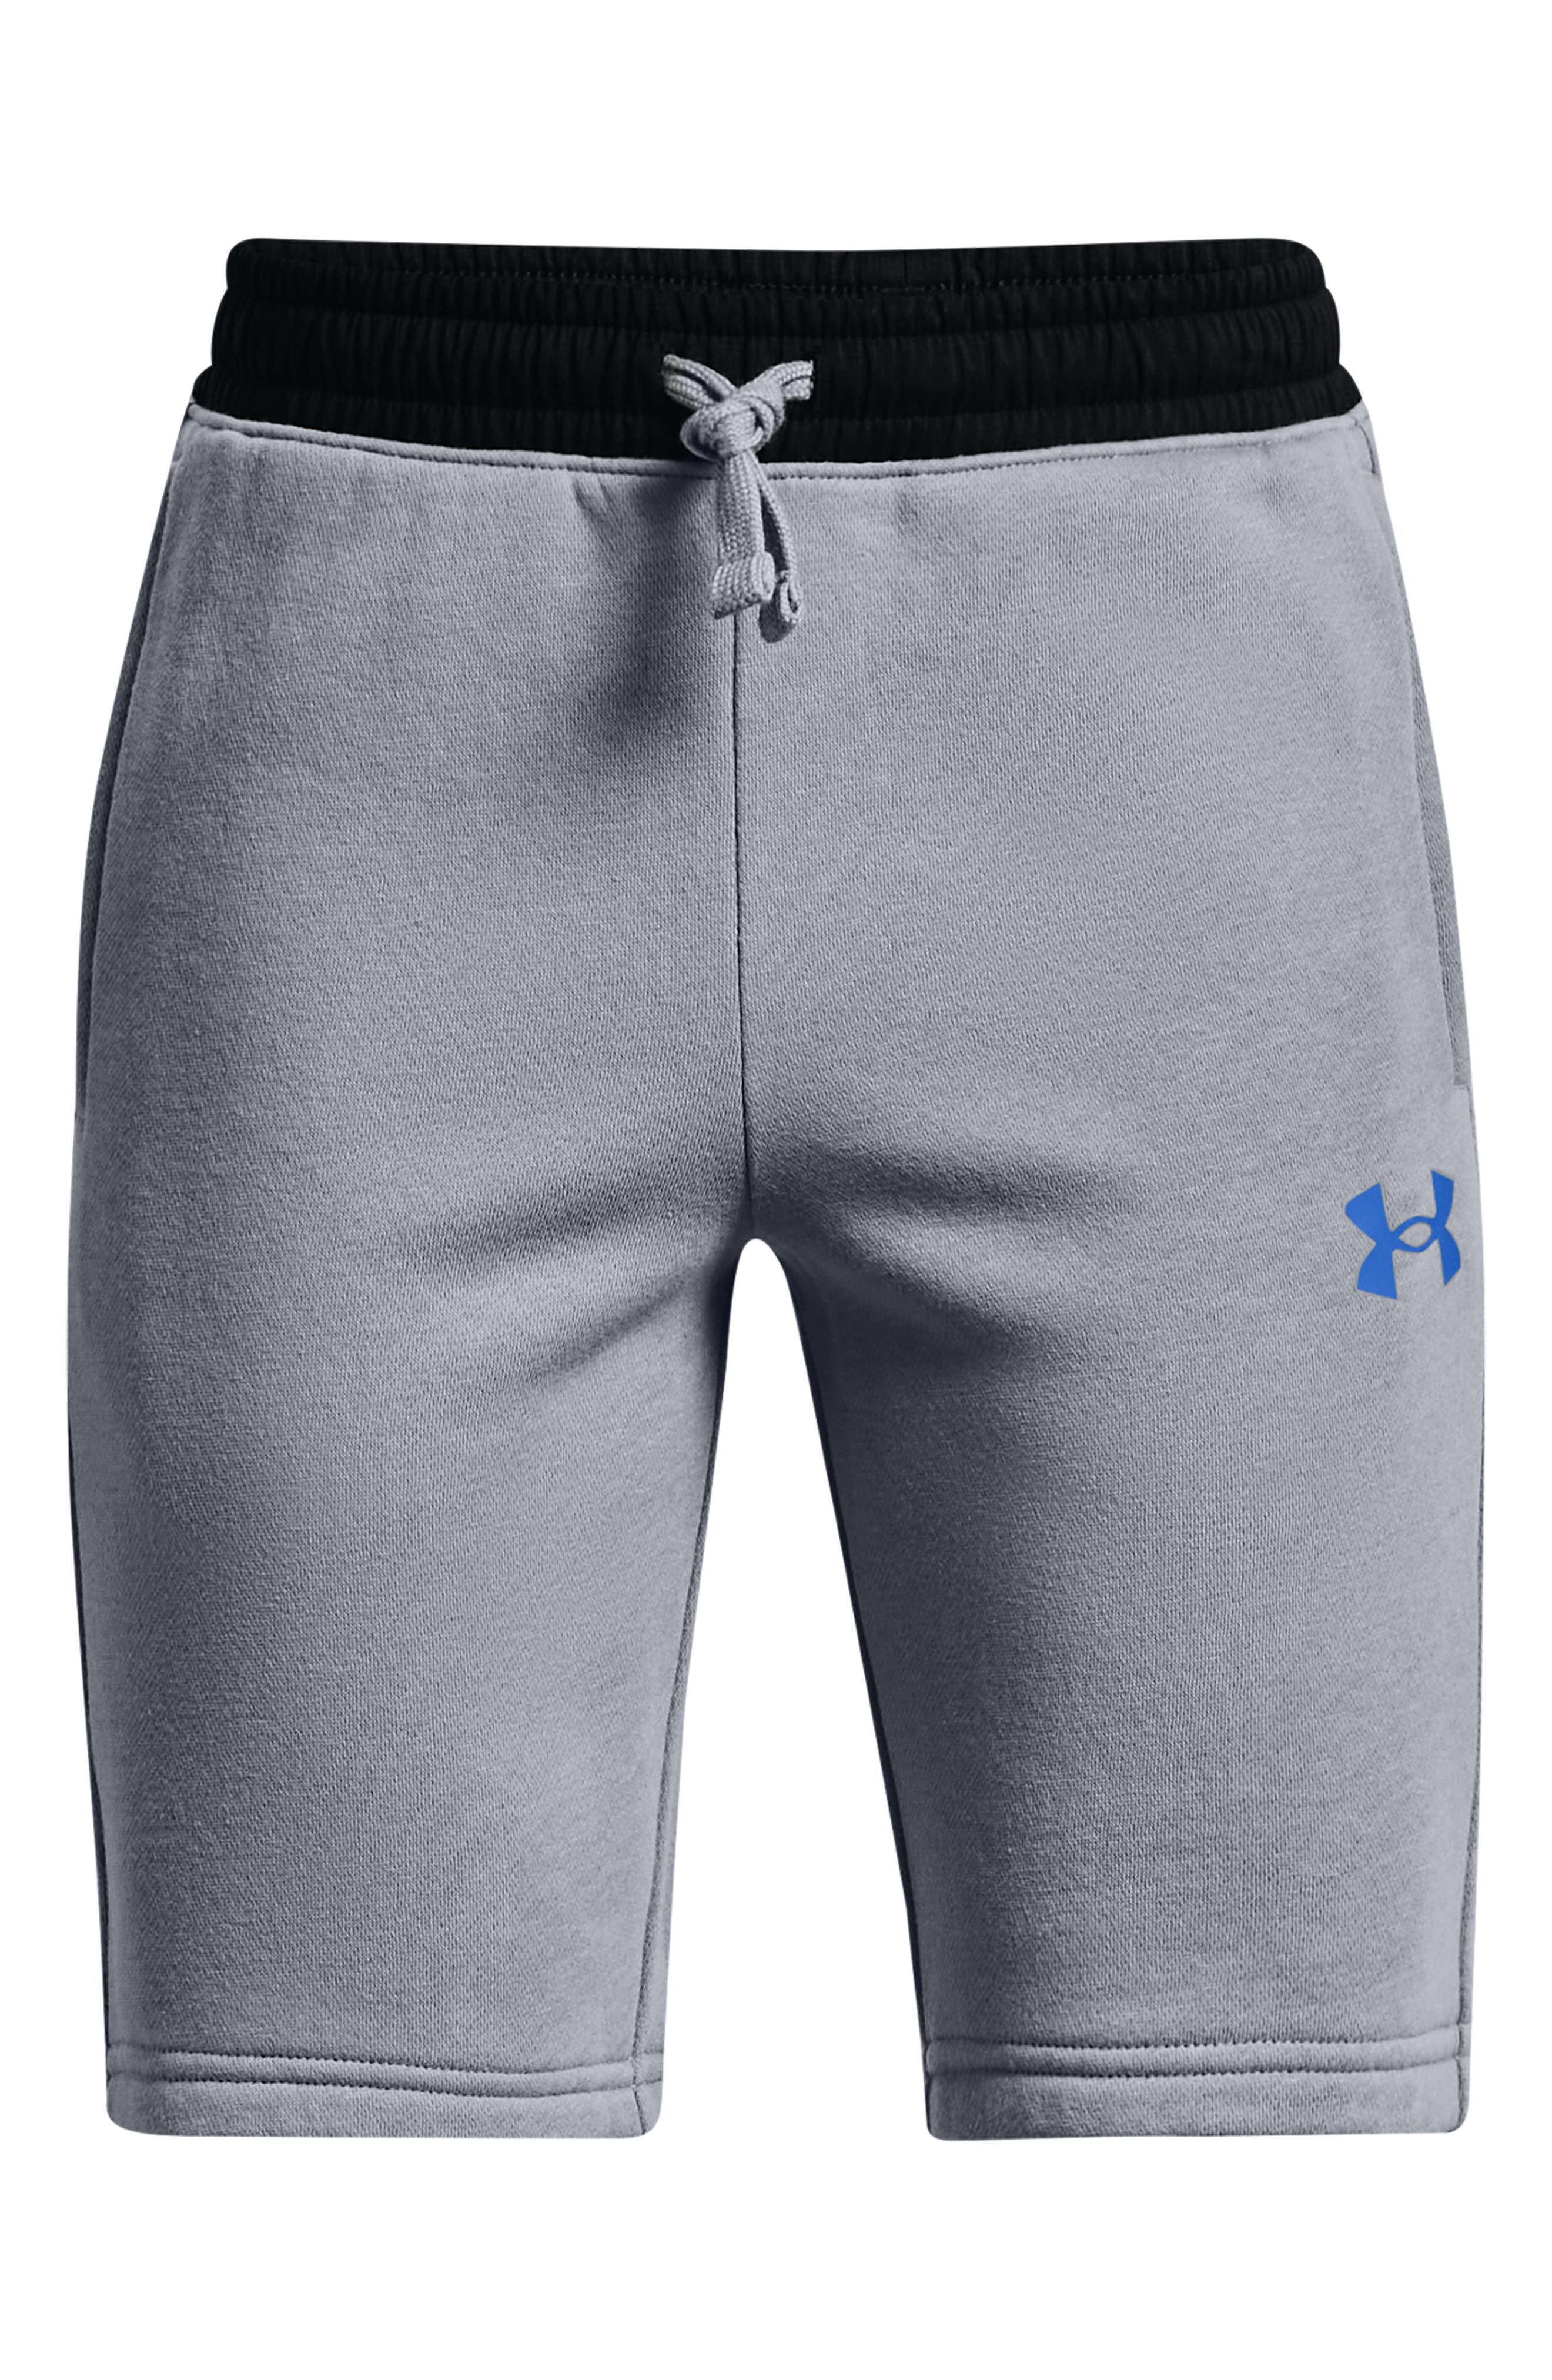 Under Armour Boys' Instinct Printed Shorts 19 Colors 